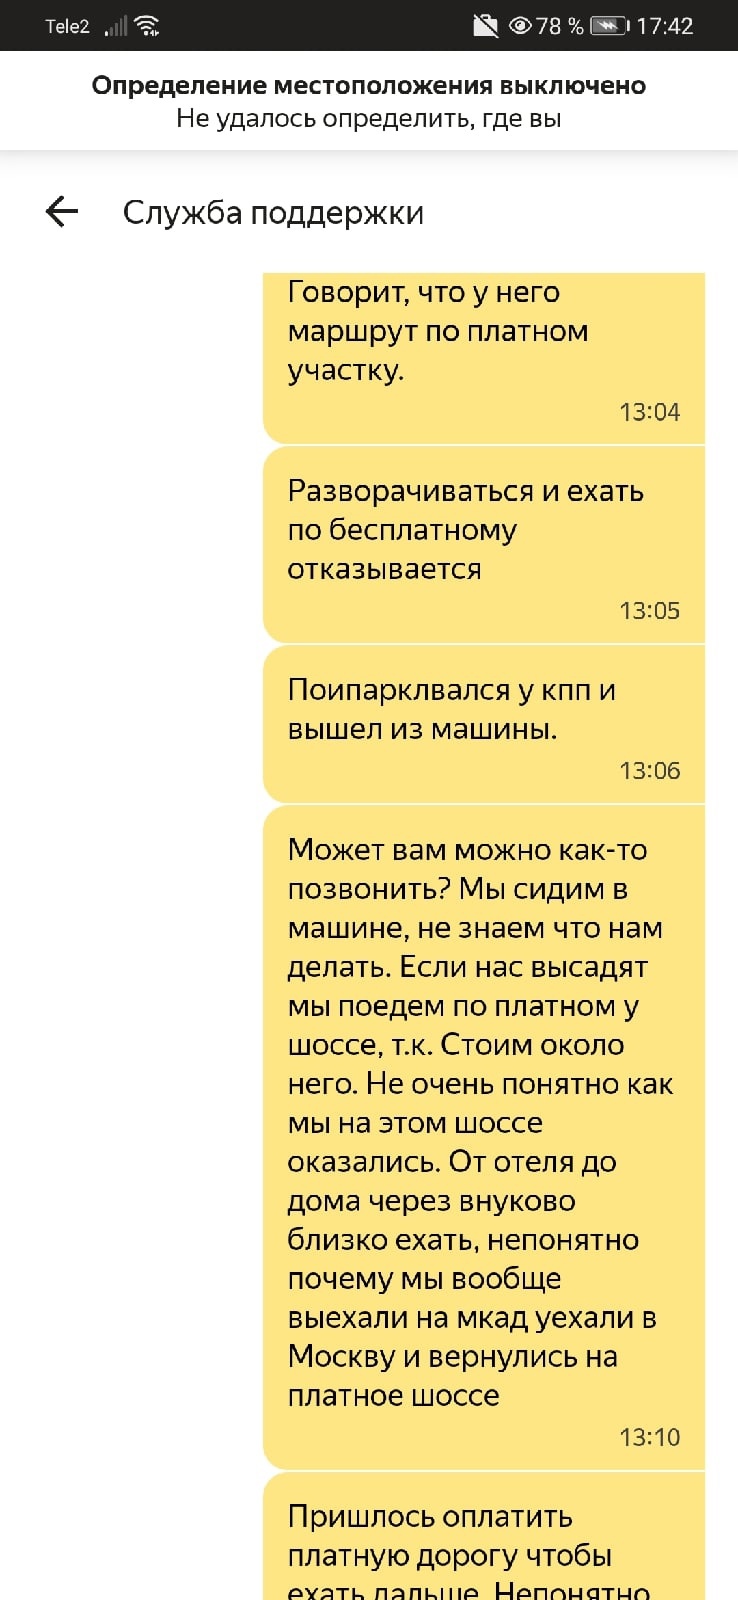 How another moonduck drove me and my wife and how technical support helped me - My, Taxi, Yandex Taxi, Yandex., Driver, Scandal, Bad service, Support service, Mat, Longpost, , Negative